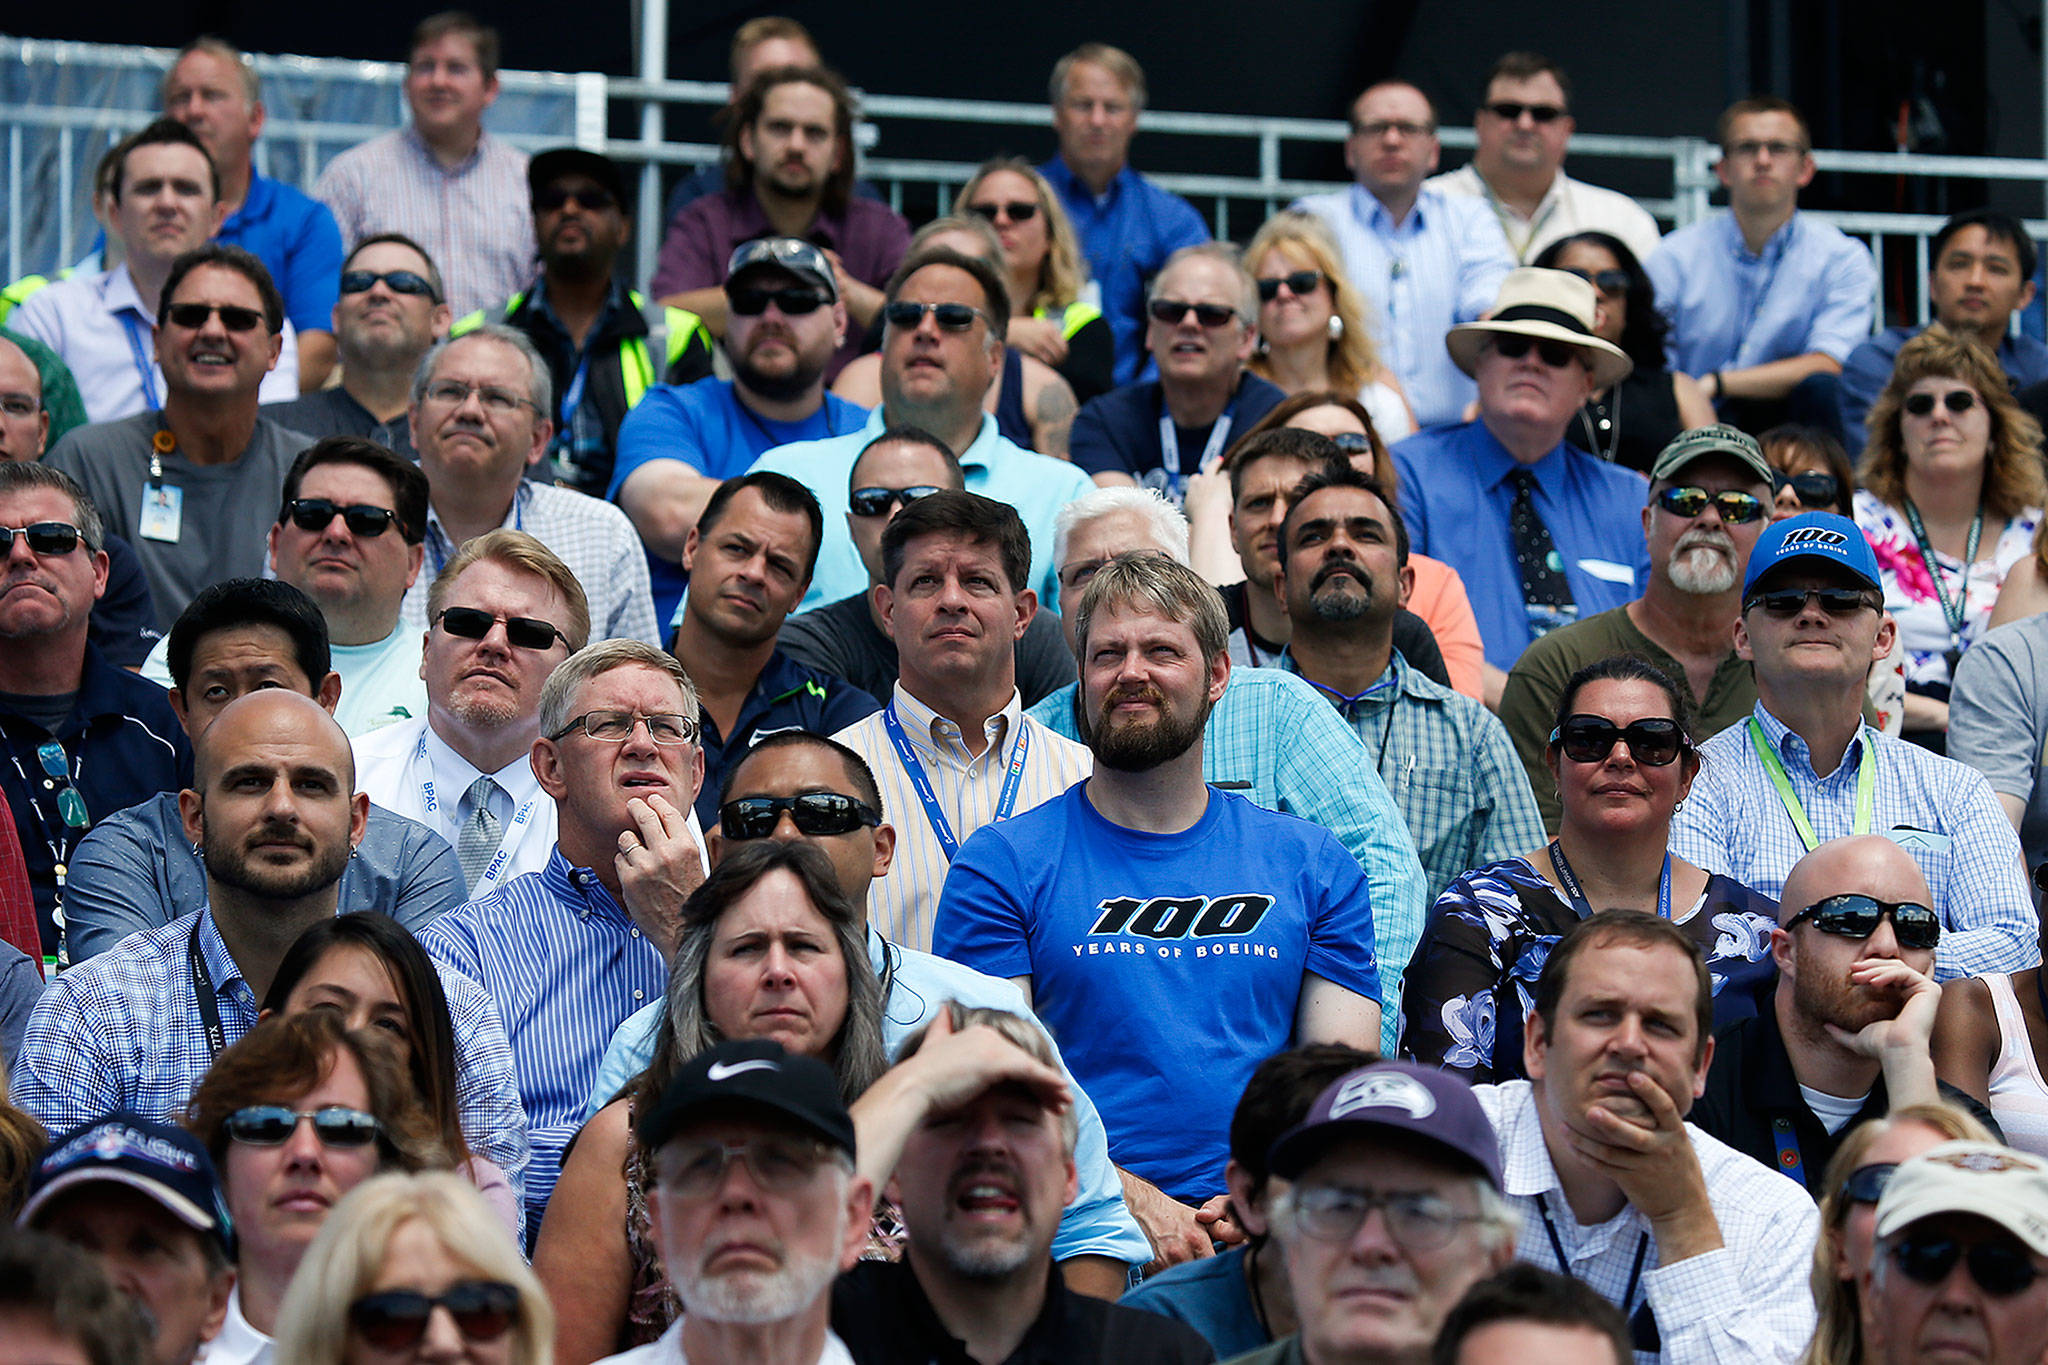 Wearing a Boeing 100th anniversary T-shirt, Everett employee Matt Carlsen stands among other workers and retirees at a centennial celebration at Boeing Field in Seattle in 2016. (Ian Terry / Herald file)